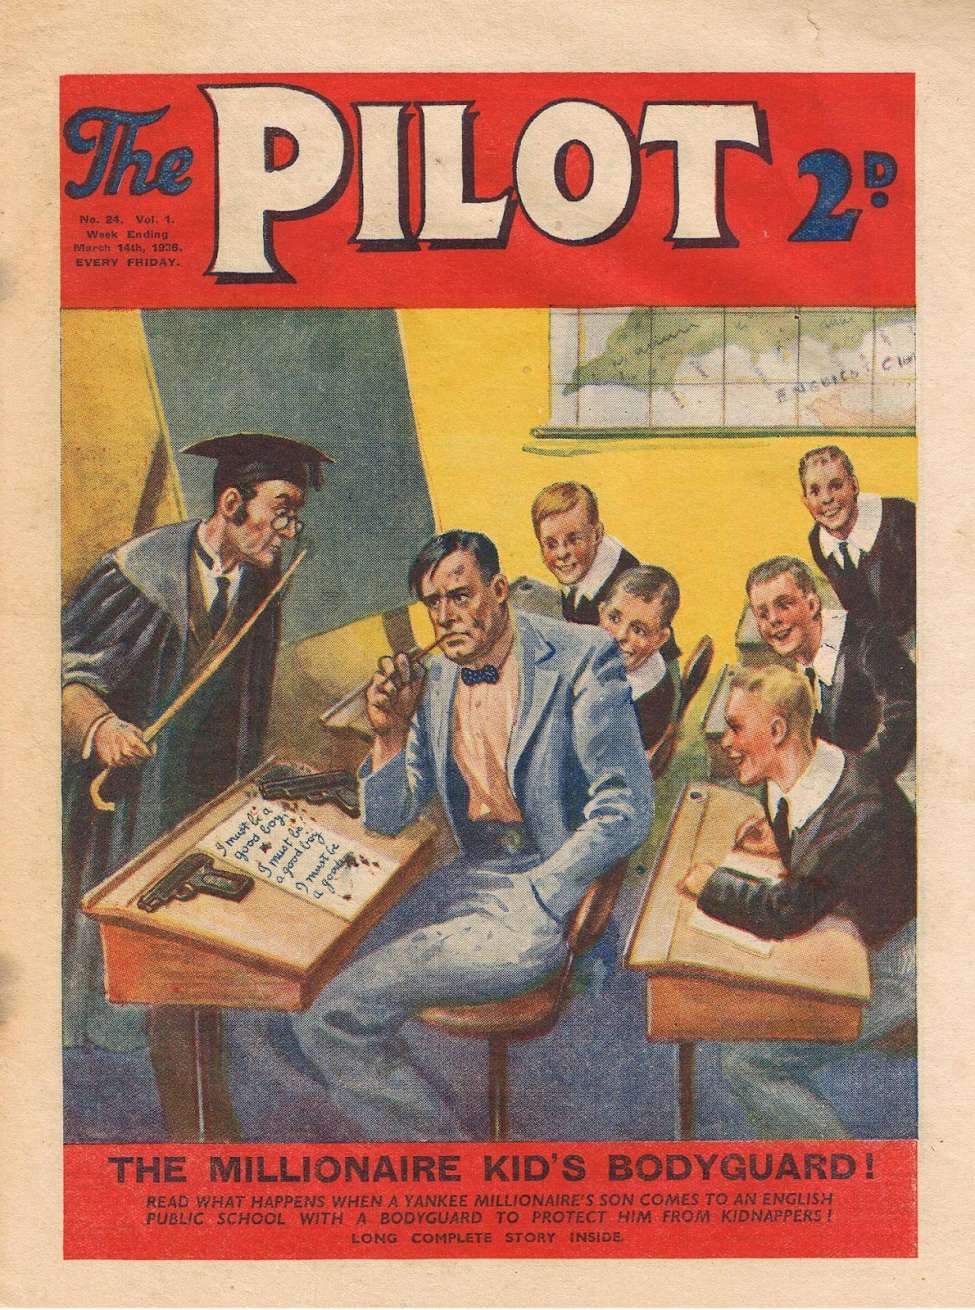 Book Cover For The Pilot 24